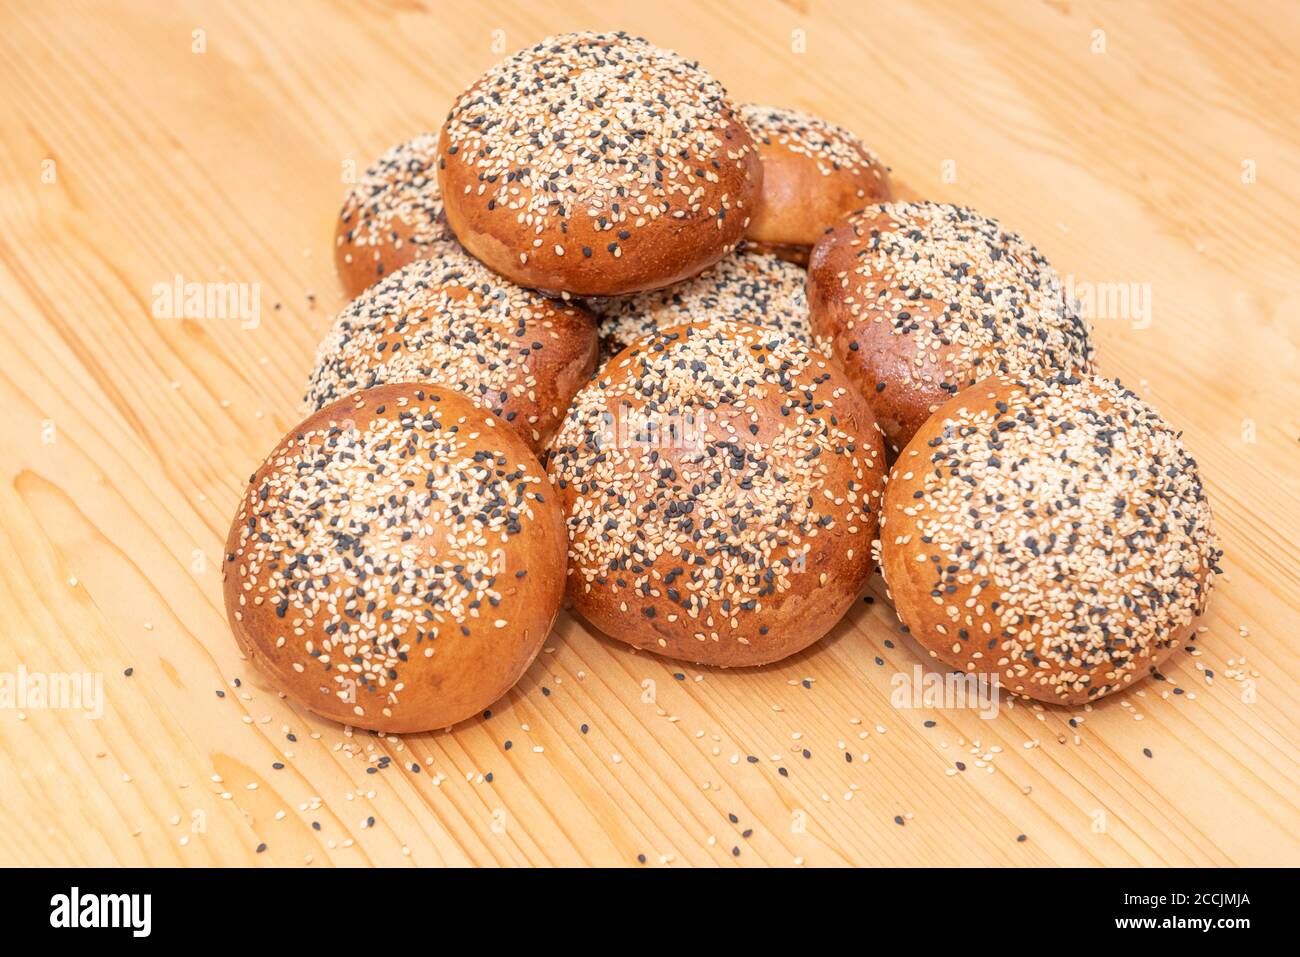 stack of small brown breads with white and black sesame on wooden table, used for burgers Stock Photo